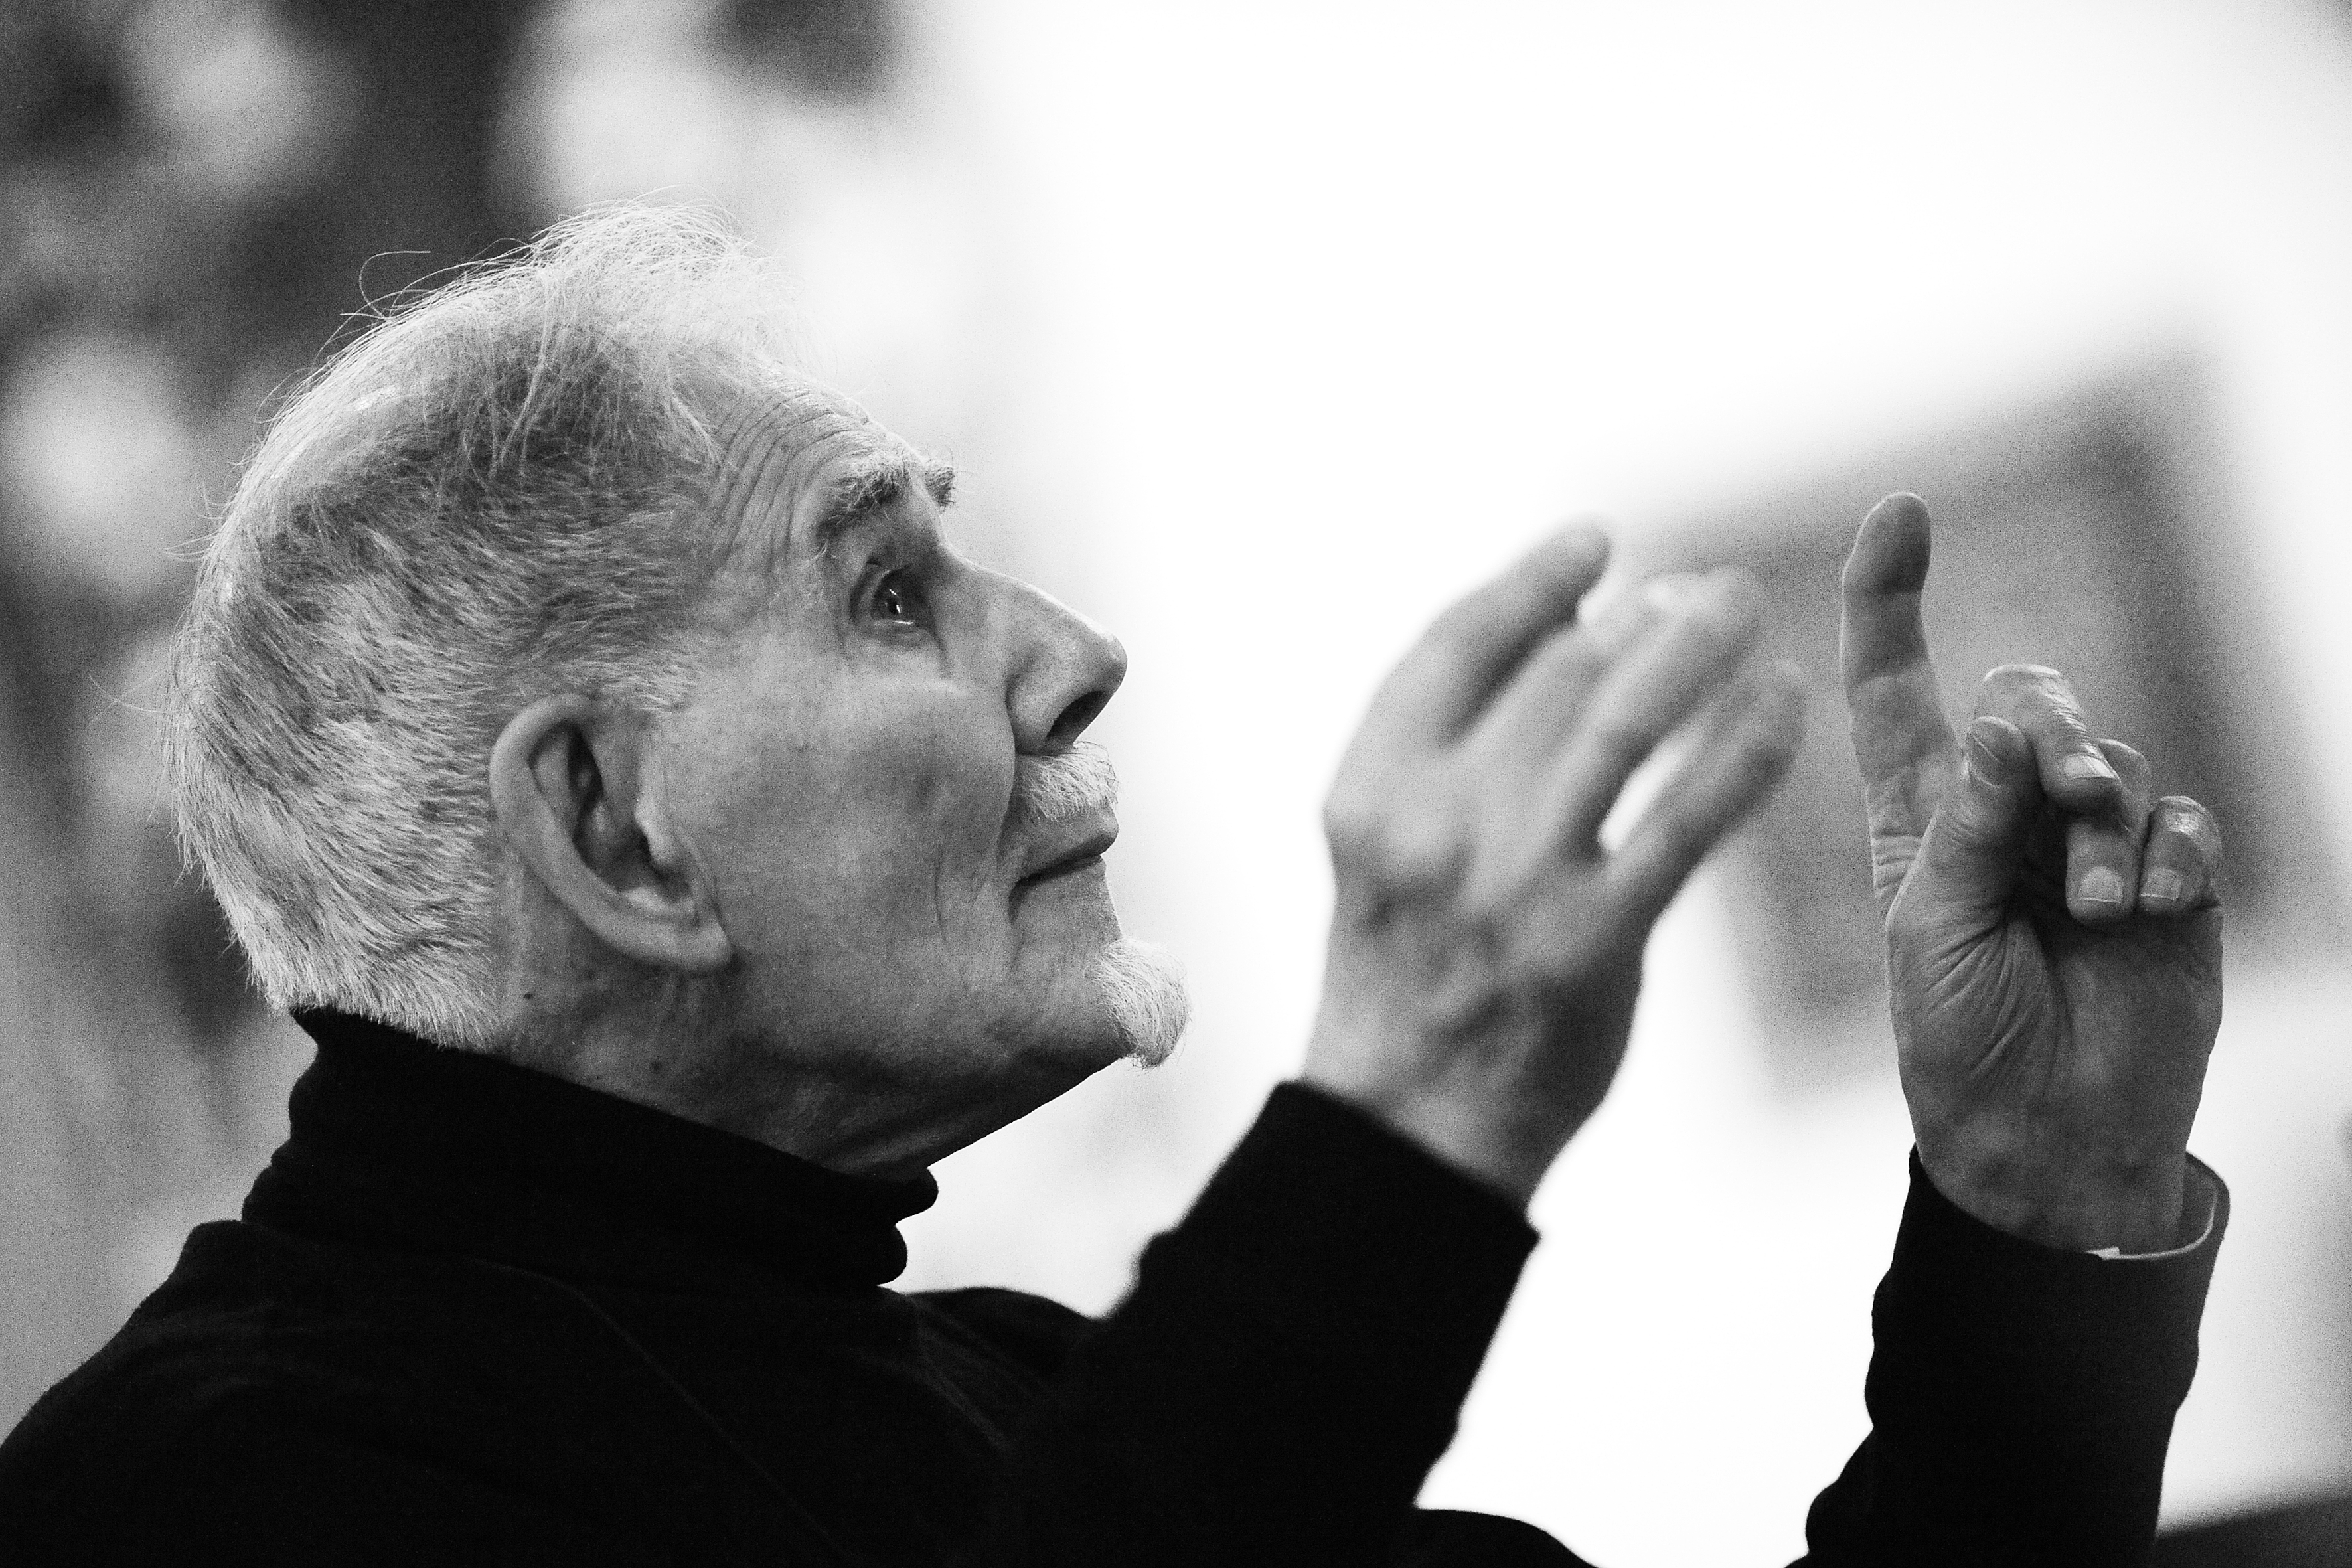 Stephen Wilkinson at 90 in 2009 conducting the William Byrd Singers